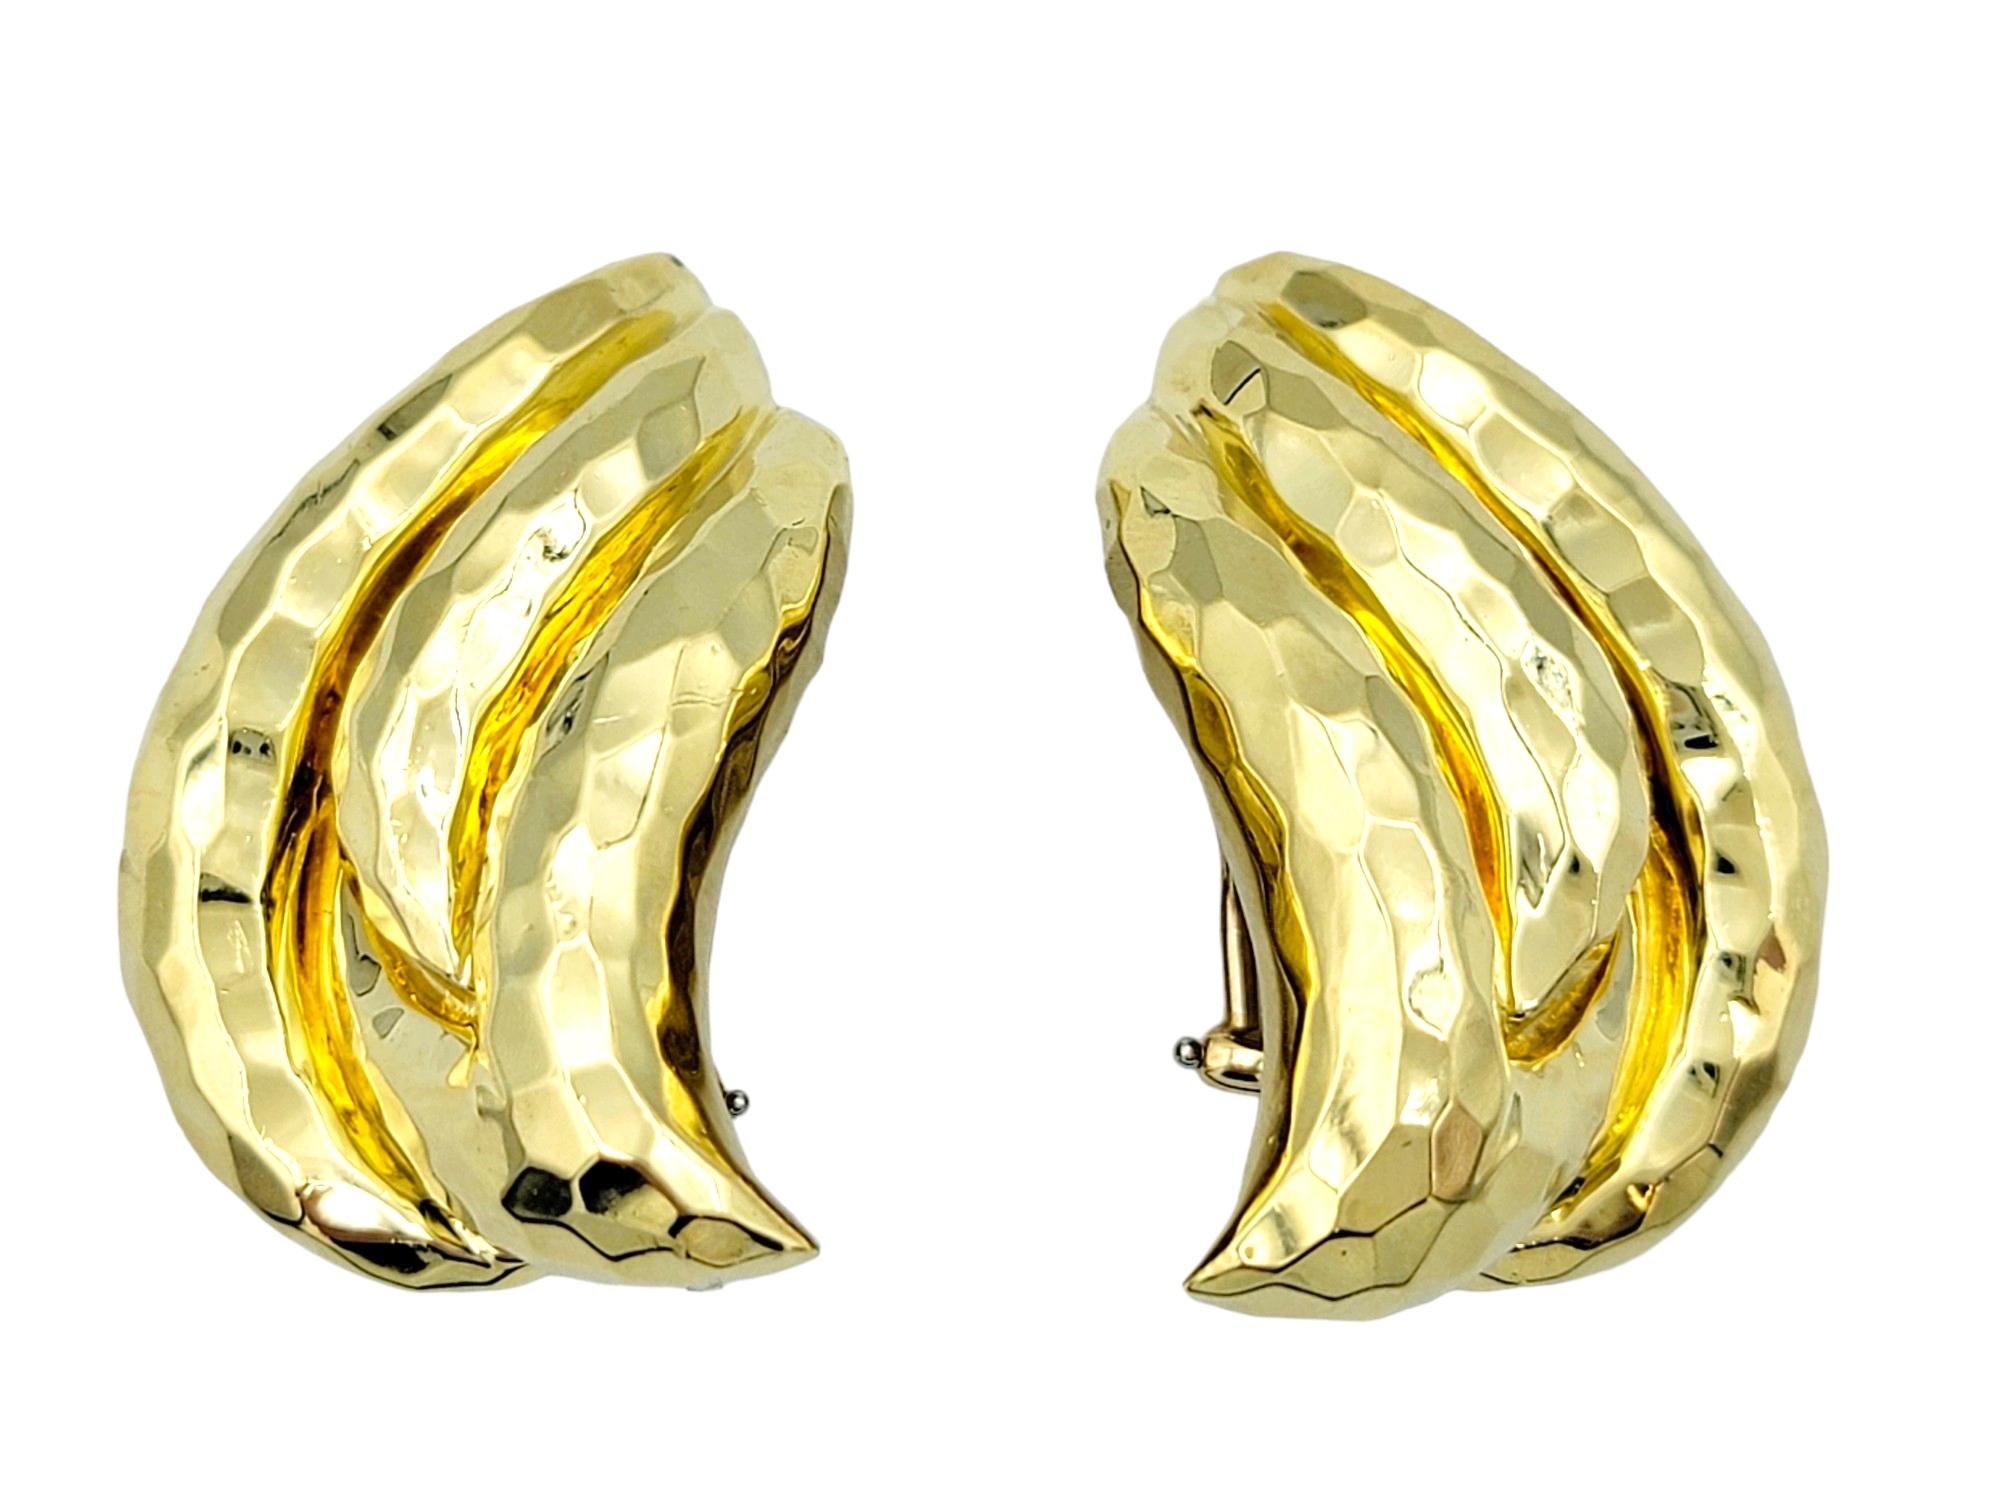 This gorgeous pair of Henry Dunay clip-on earrings, crafted in radiant 18 karat yellow gold, is a testament to the designer's distinctive artistry and craftsmanship. The large flame-like design, adorned with a hammered finish, creates a mesmerizing